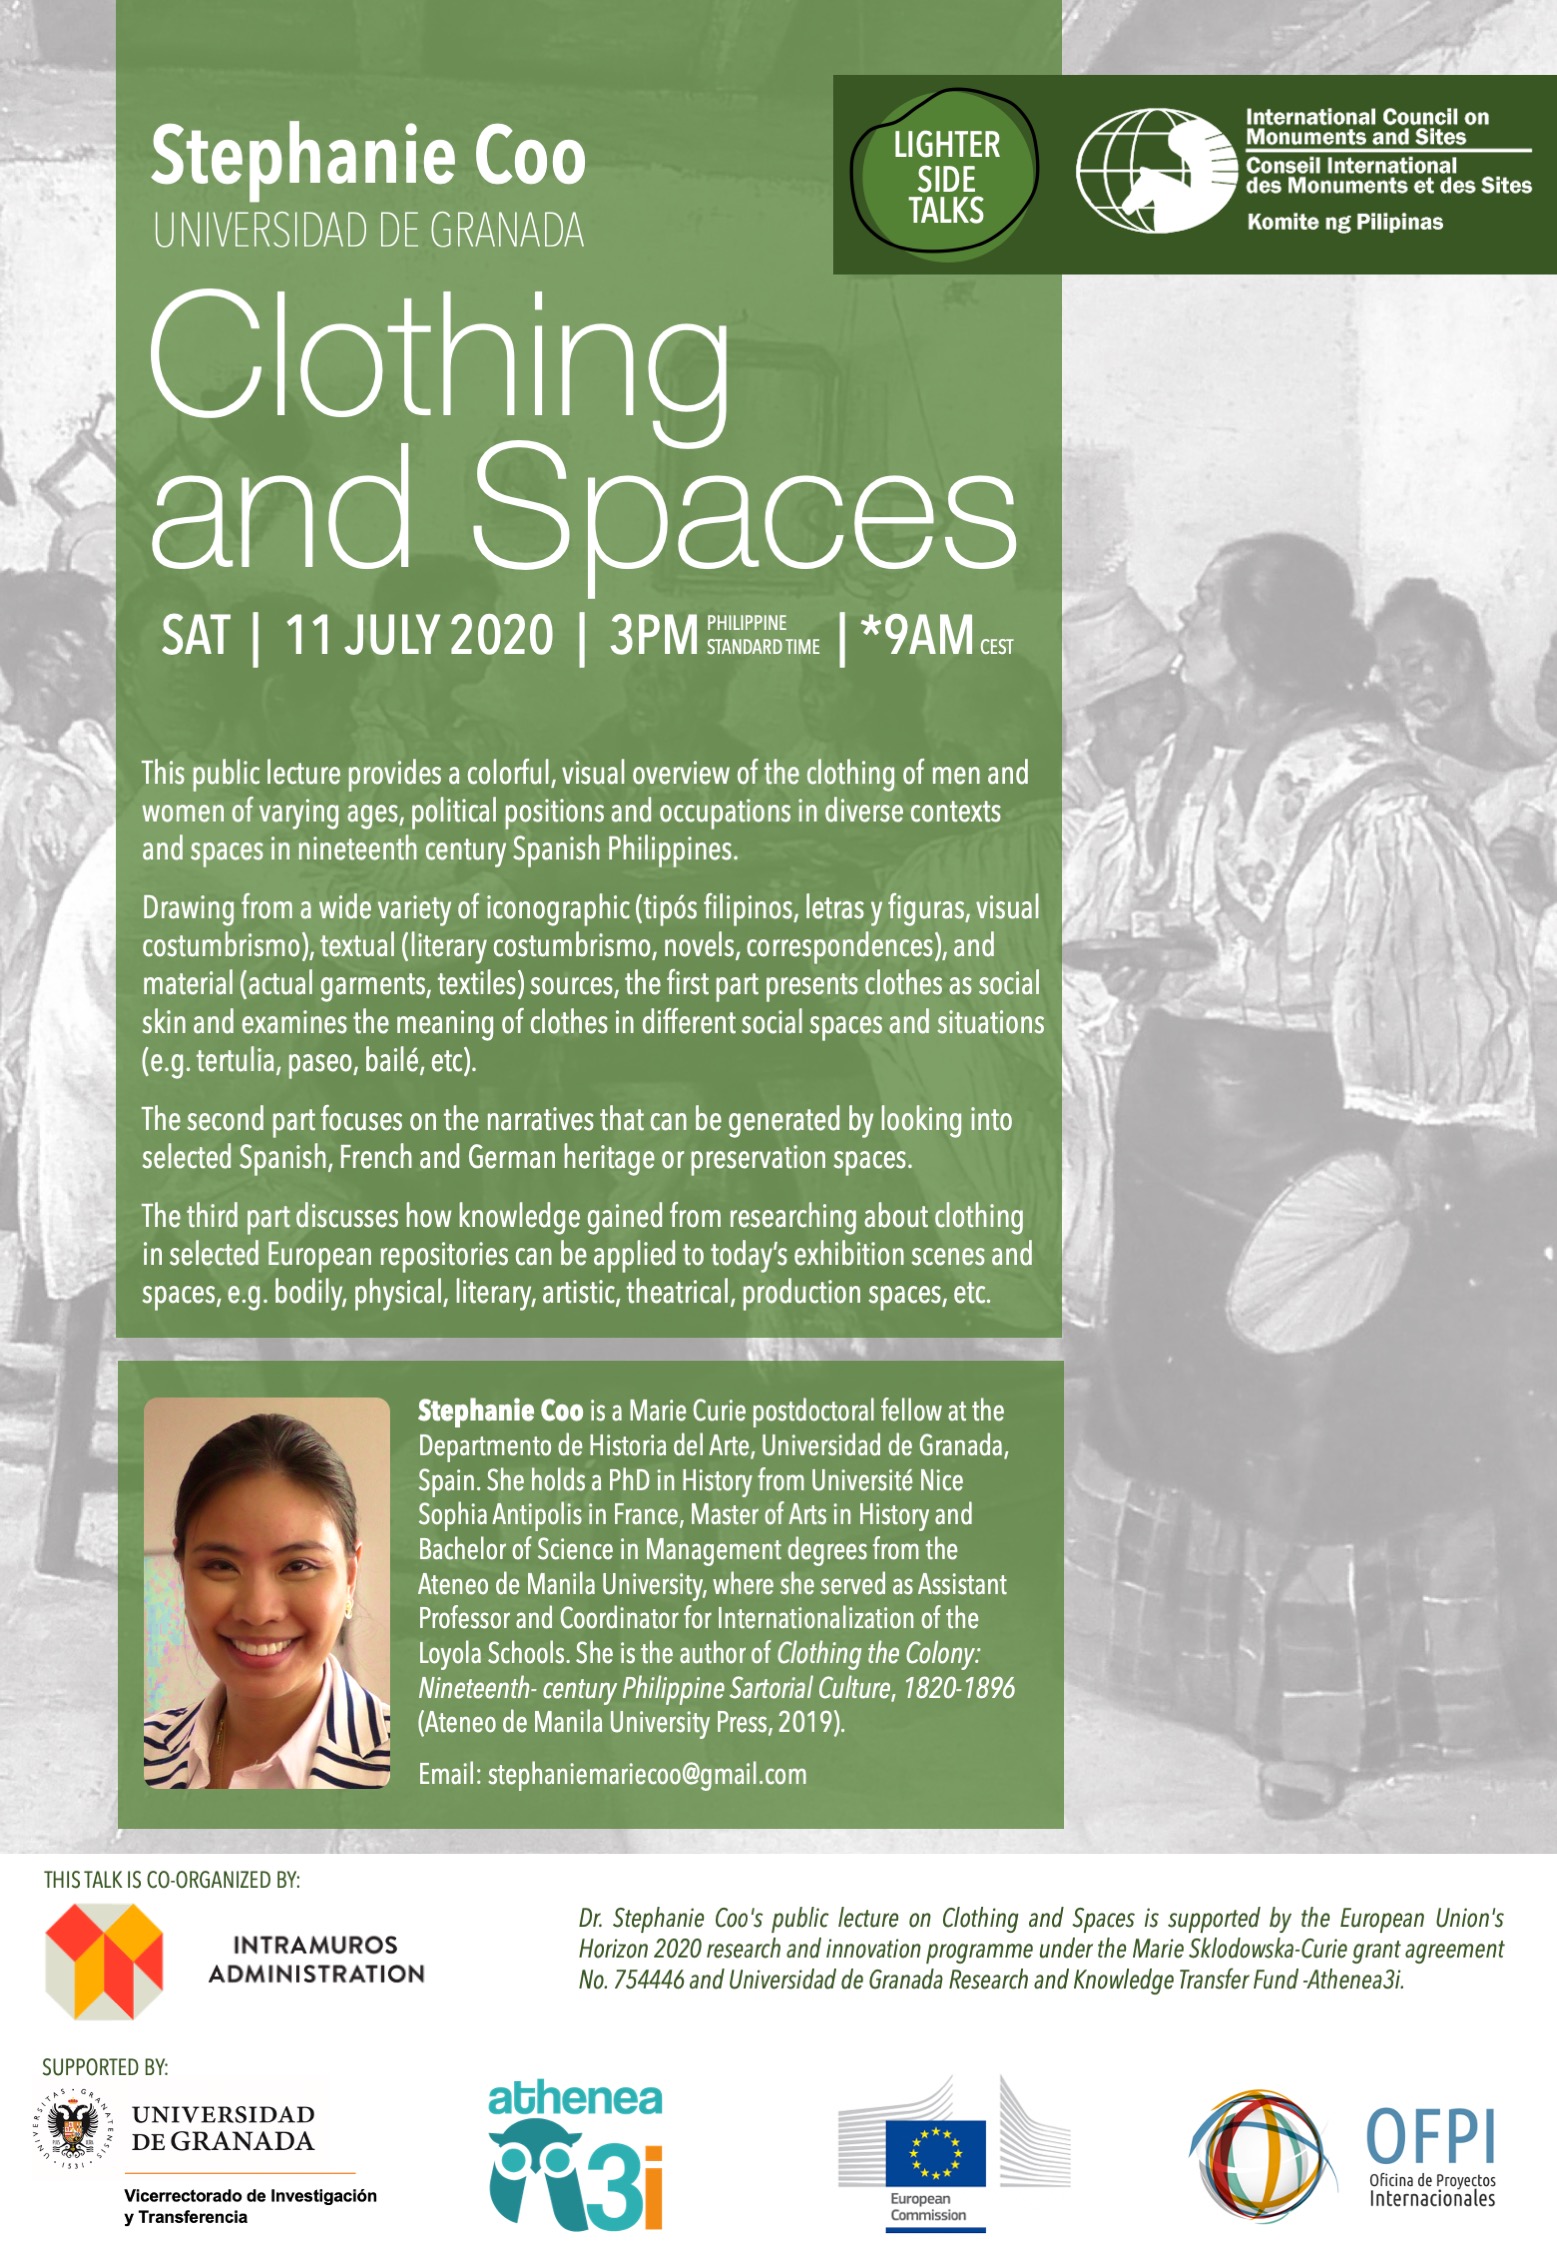 ICOMOS Lighter Side Talks: and Spaces – ICOMOS Philippines